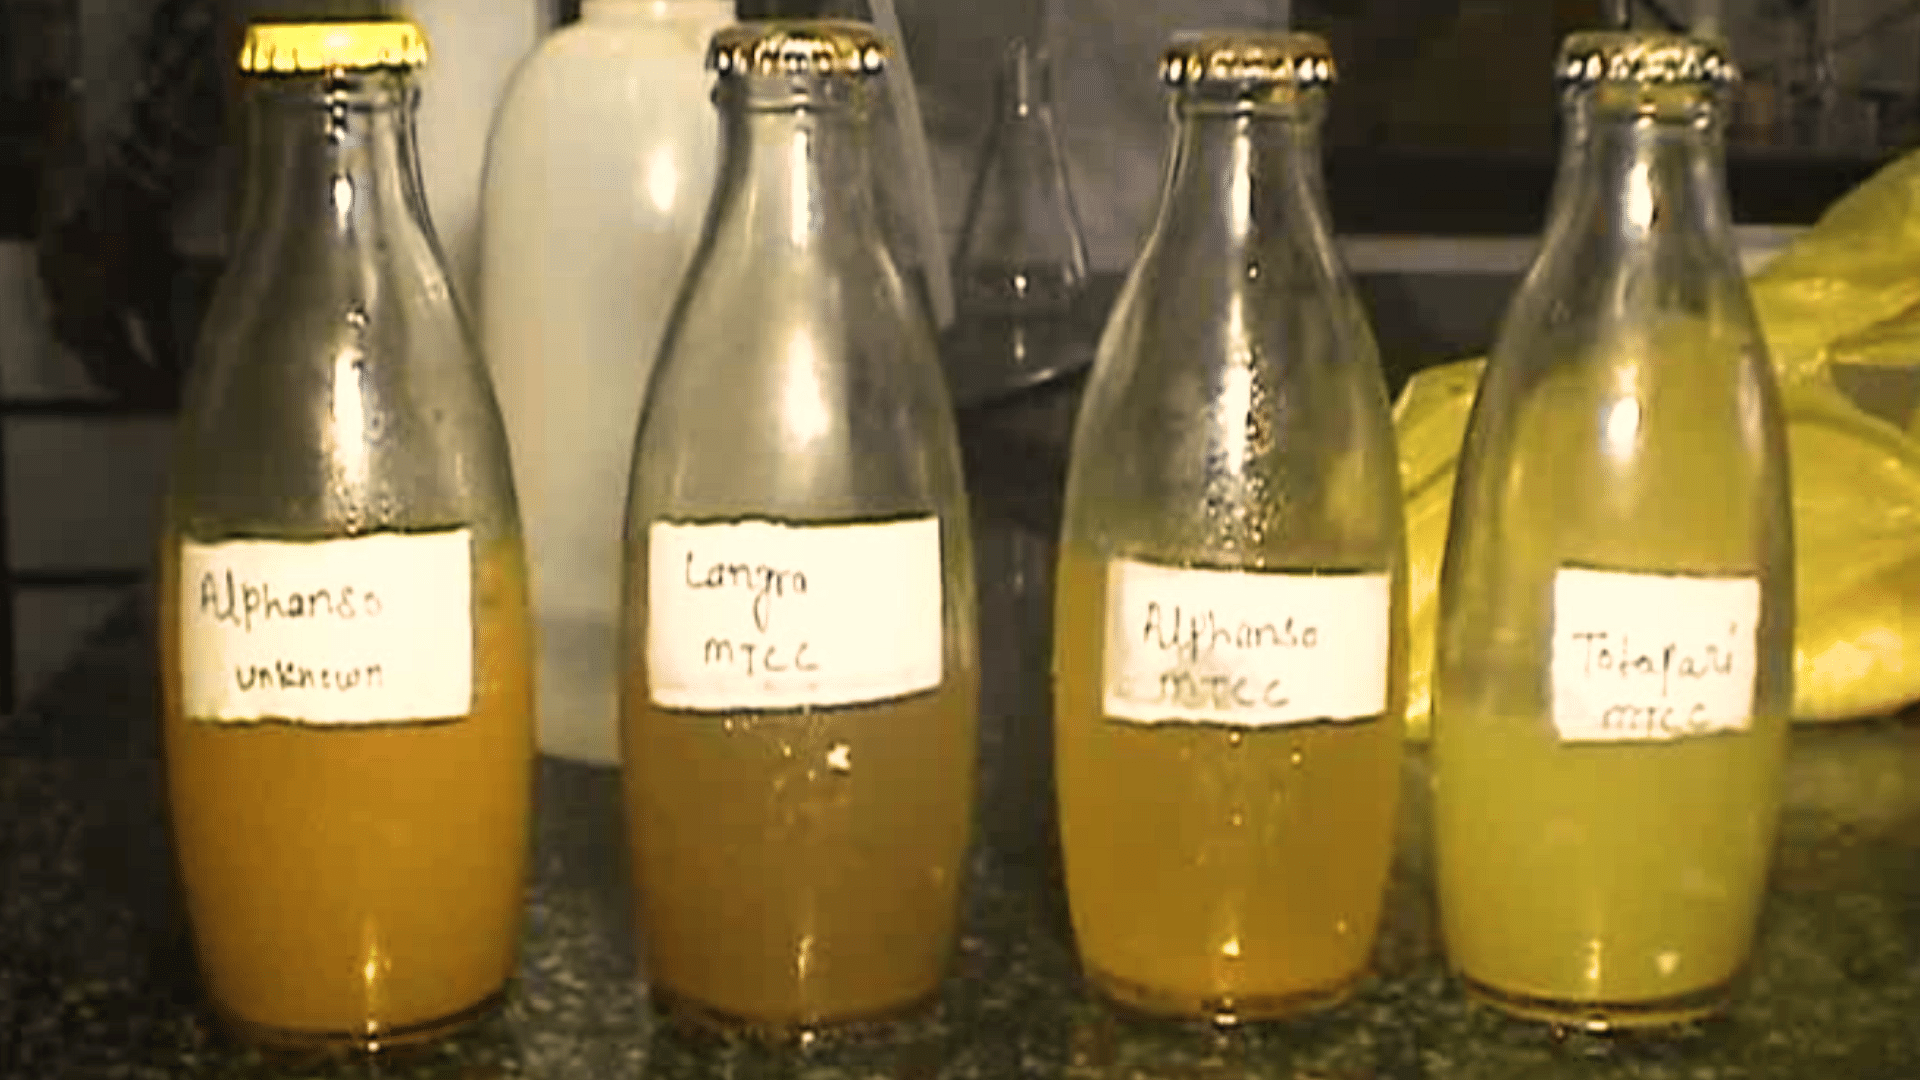 A team from Banaras Hindu University worked for six months to produce mango wine (Photo: The Quint)